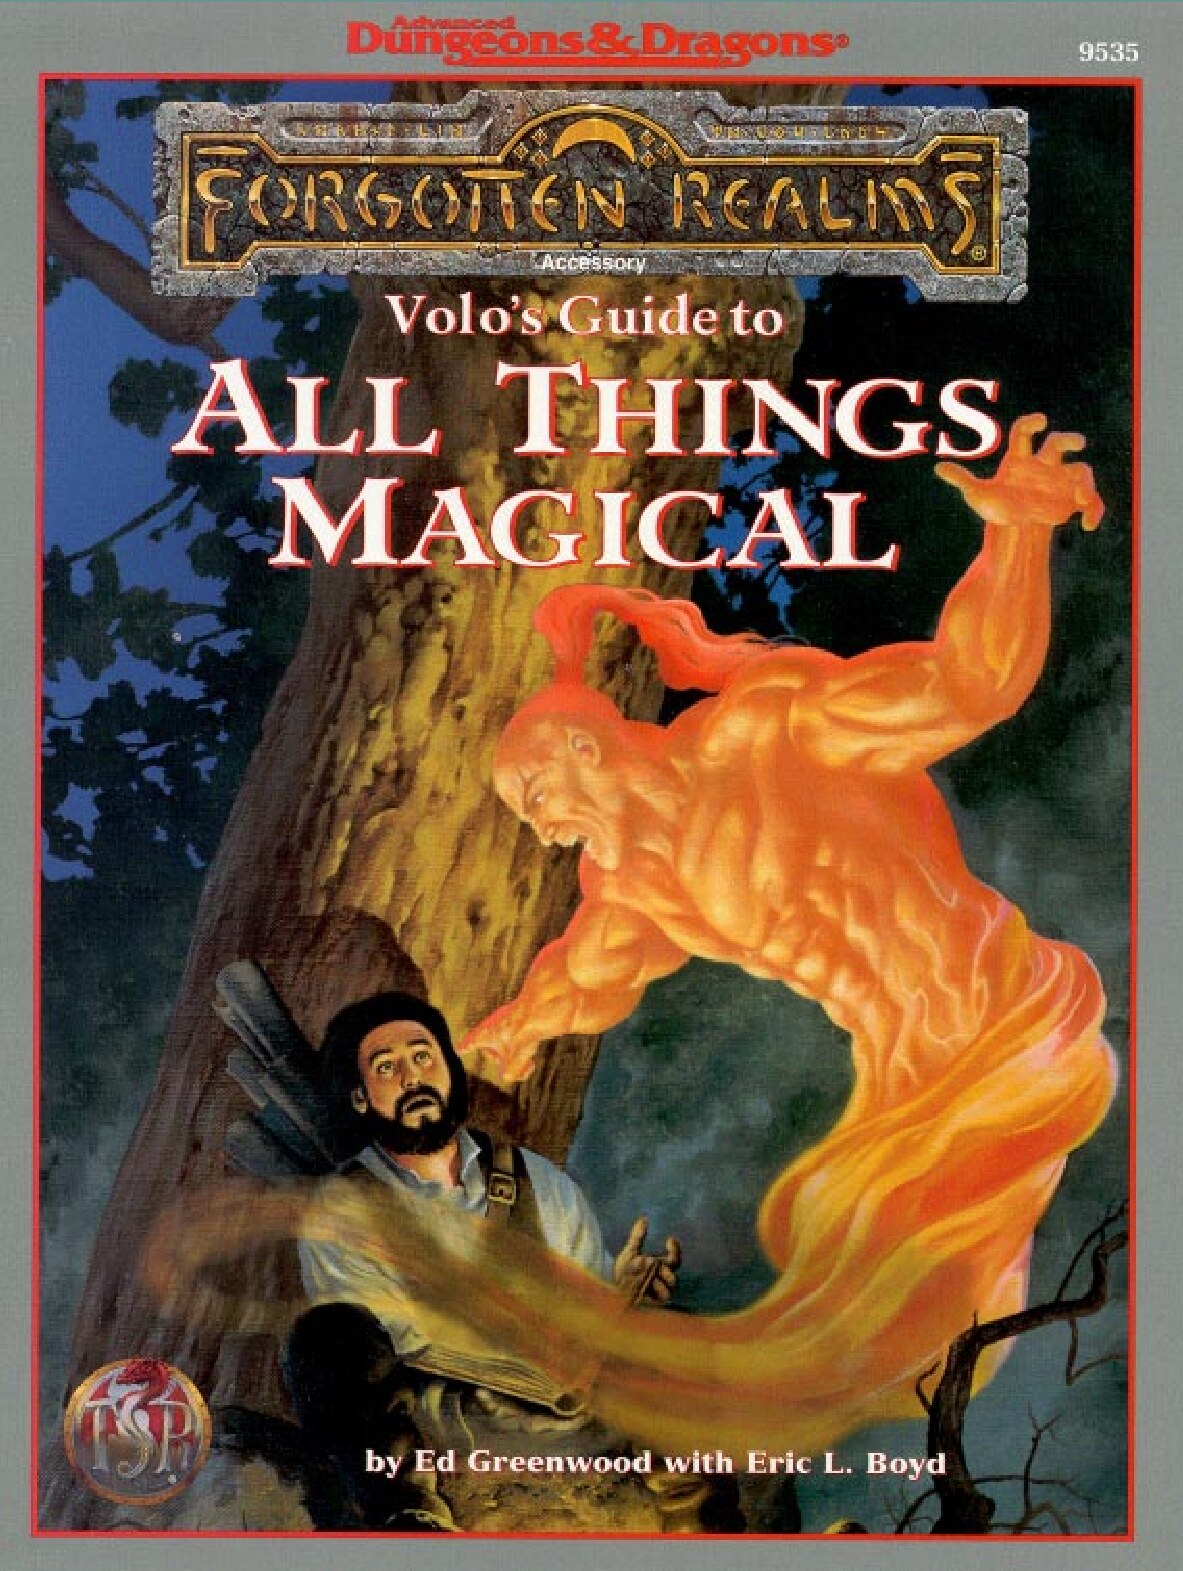 Volo's Guide to All Things Magical